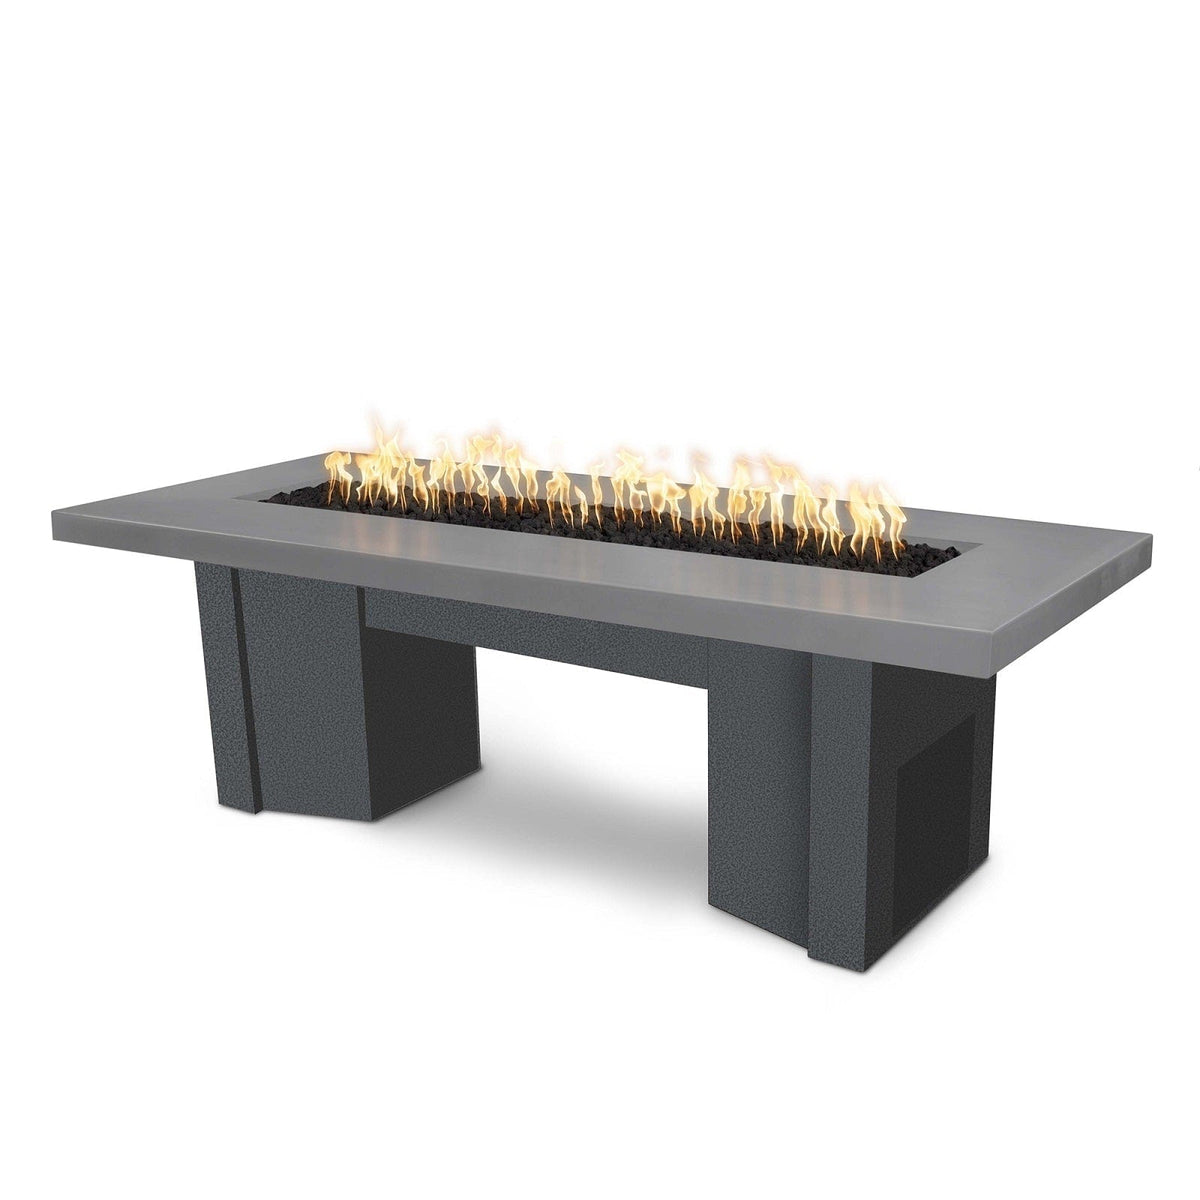 The Outdoor Plus Fire Features Natural Gray (-NGY) / Silver Vein Powder Coated Steel (-SLV) The Outdoor Plus 78&quot; Alameda Fire Table Smooth Concrete in Liquid Propane - Match Lit with Flame Sense System / OPT-ALMGFRC78FSML-LP